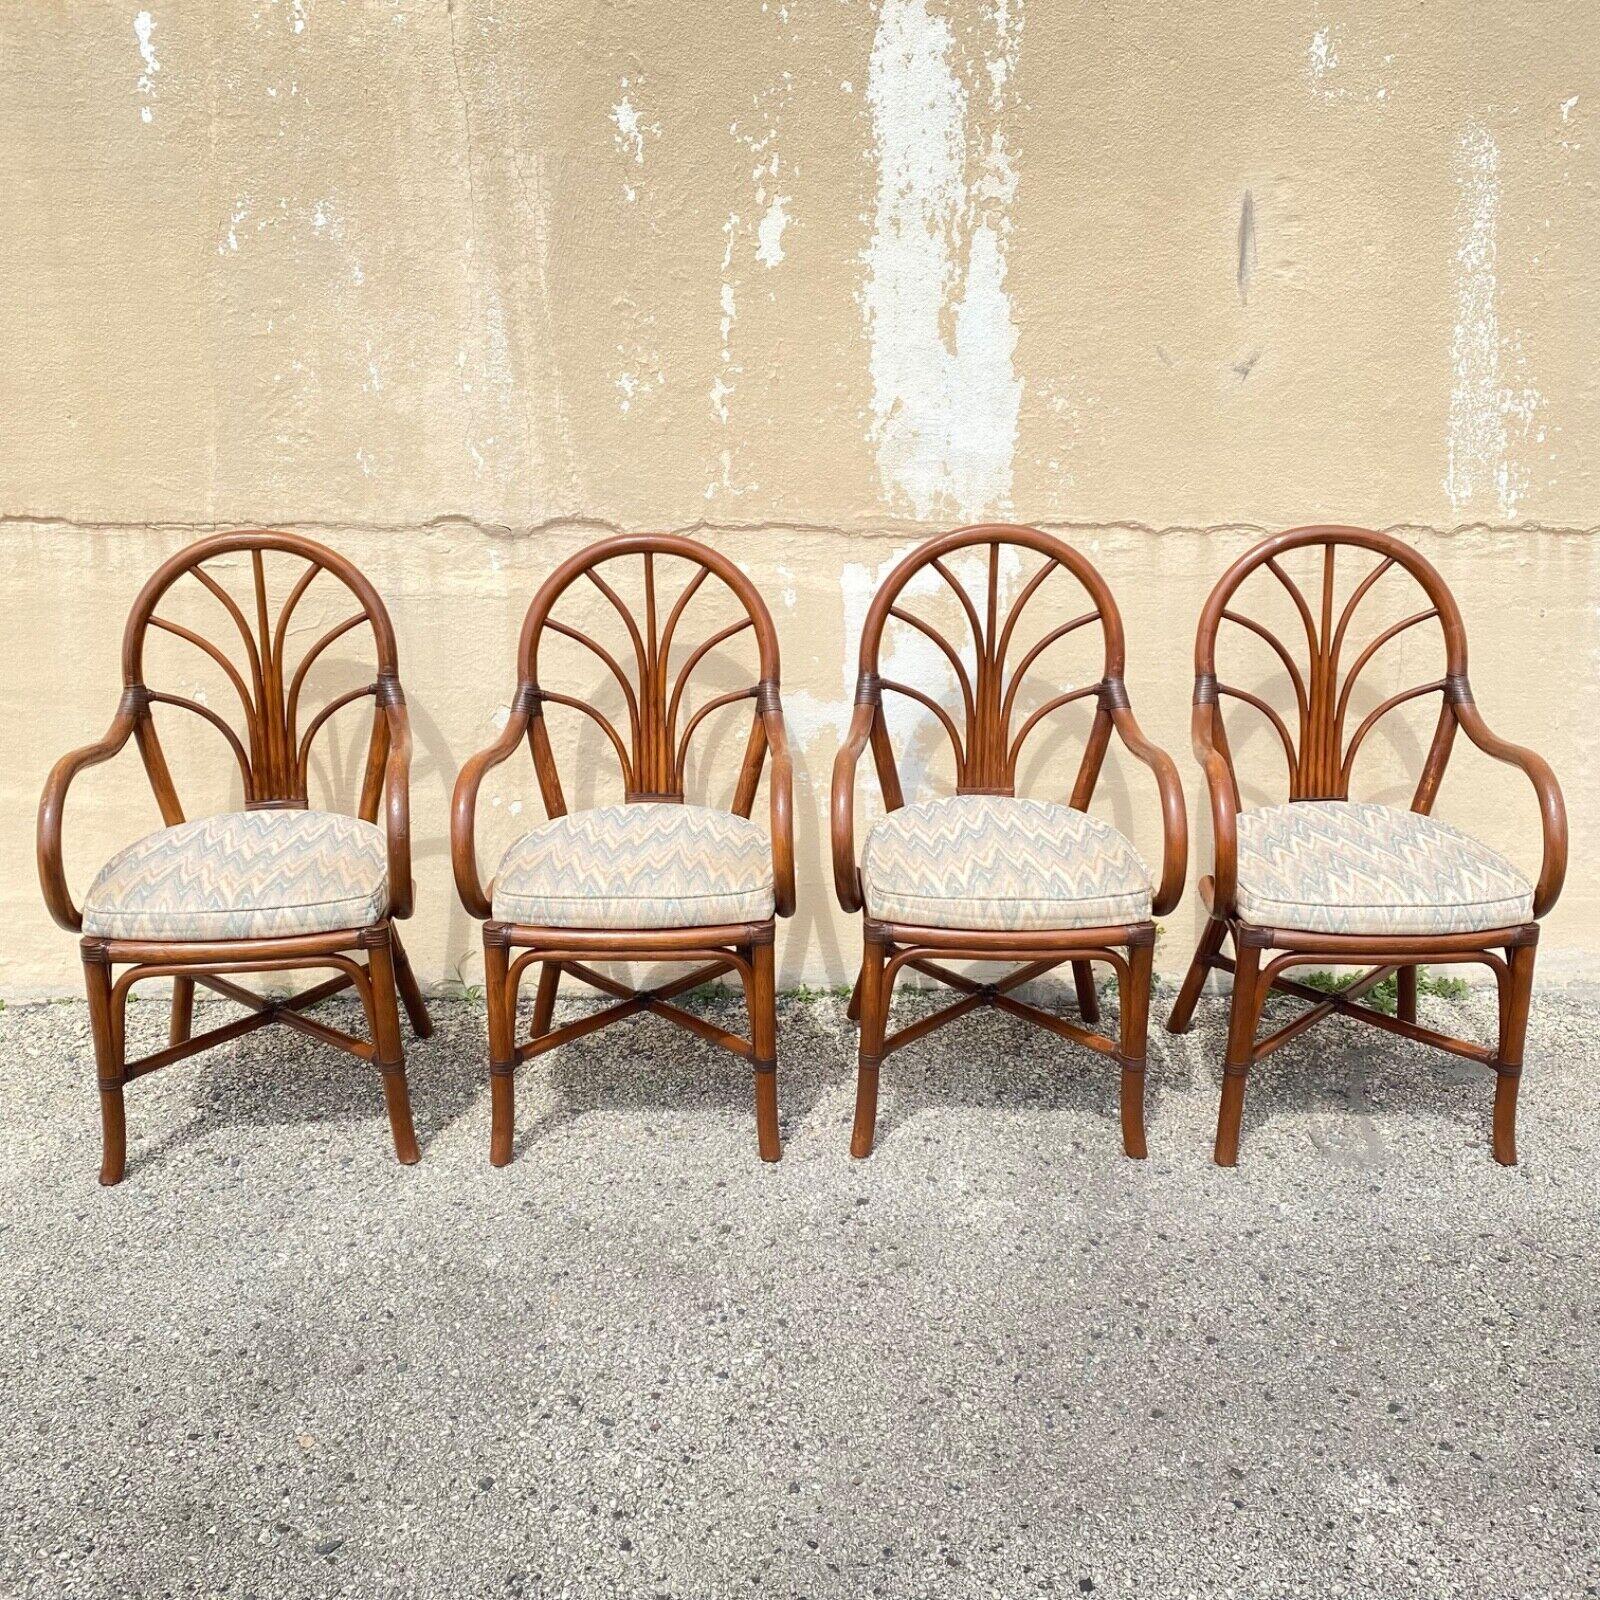 Vintage Bentwood Rattan Hollywood Regency Fan Back Dining Chairs - Set of 4 In Good Condition For Sale In Philadelphia, PA